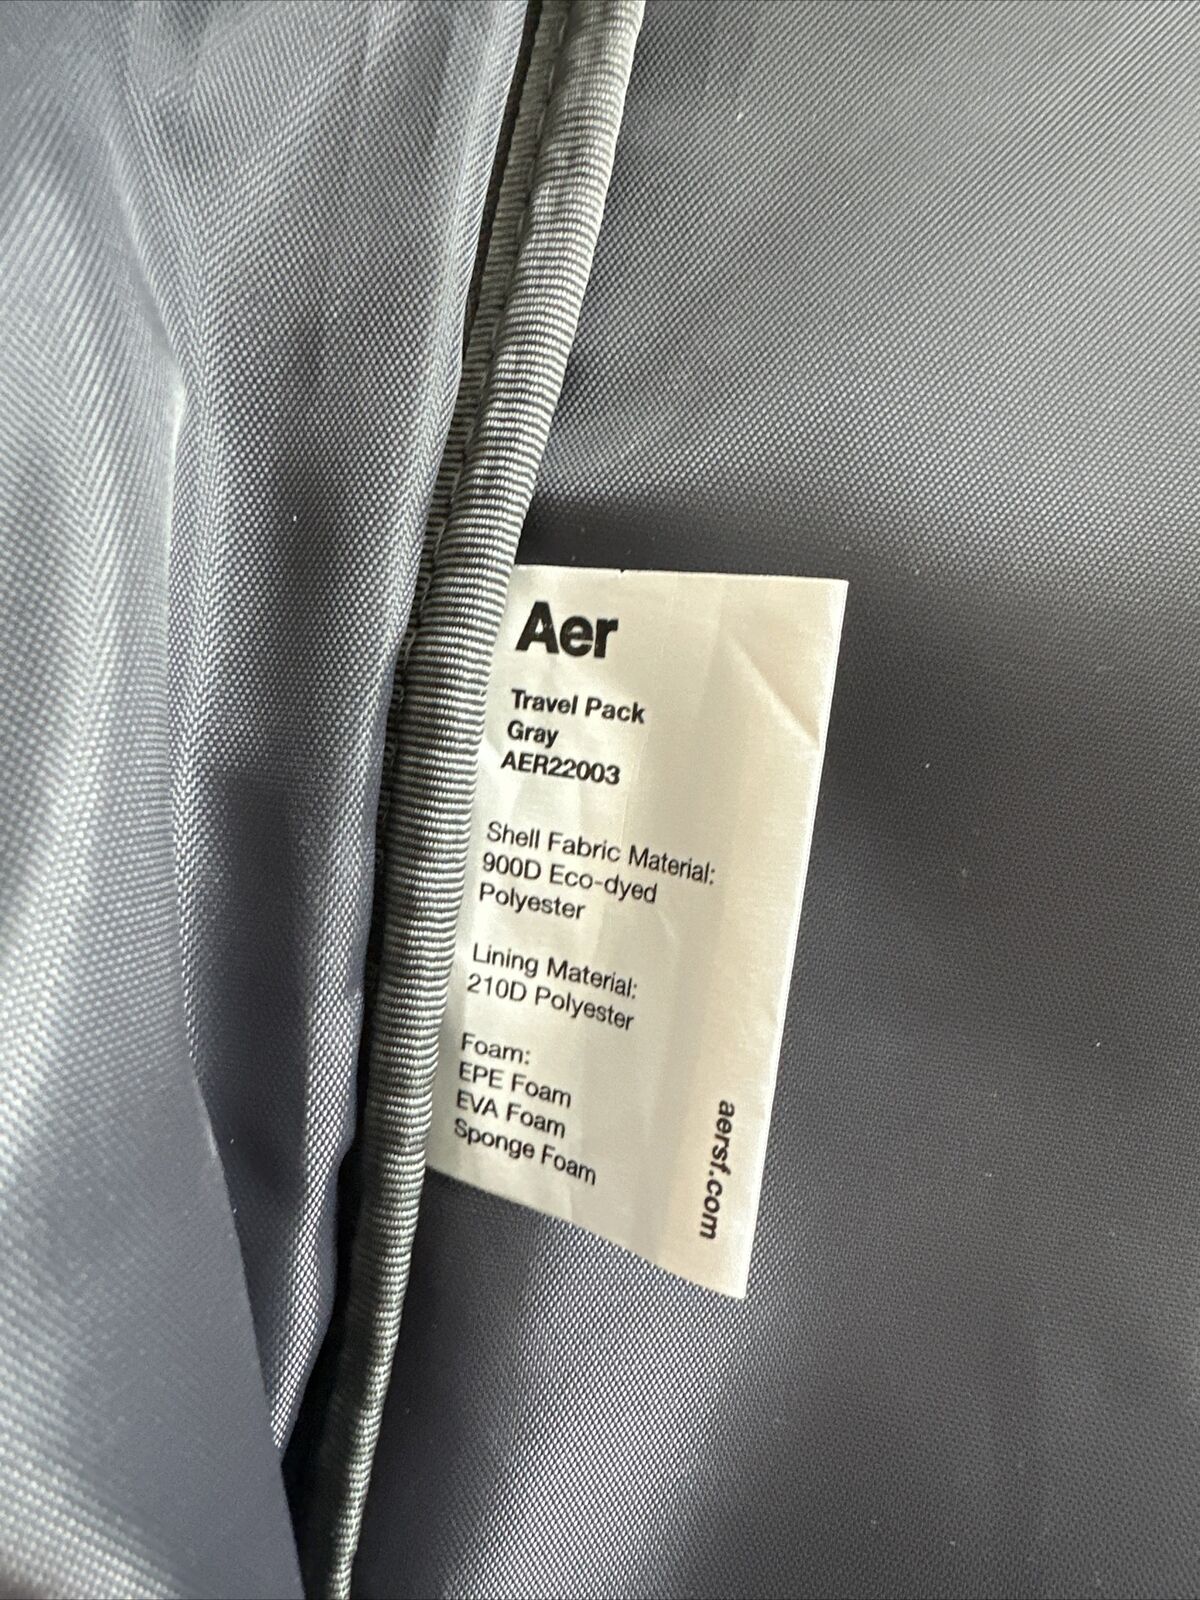 AER Travel Pack Excellent Condition - image 6